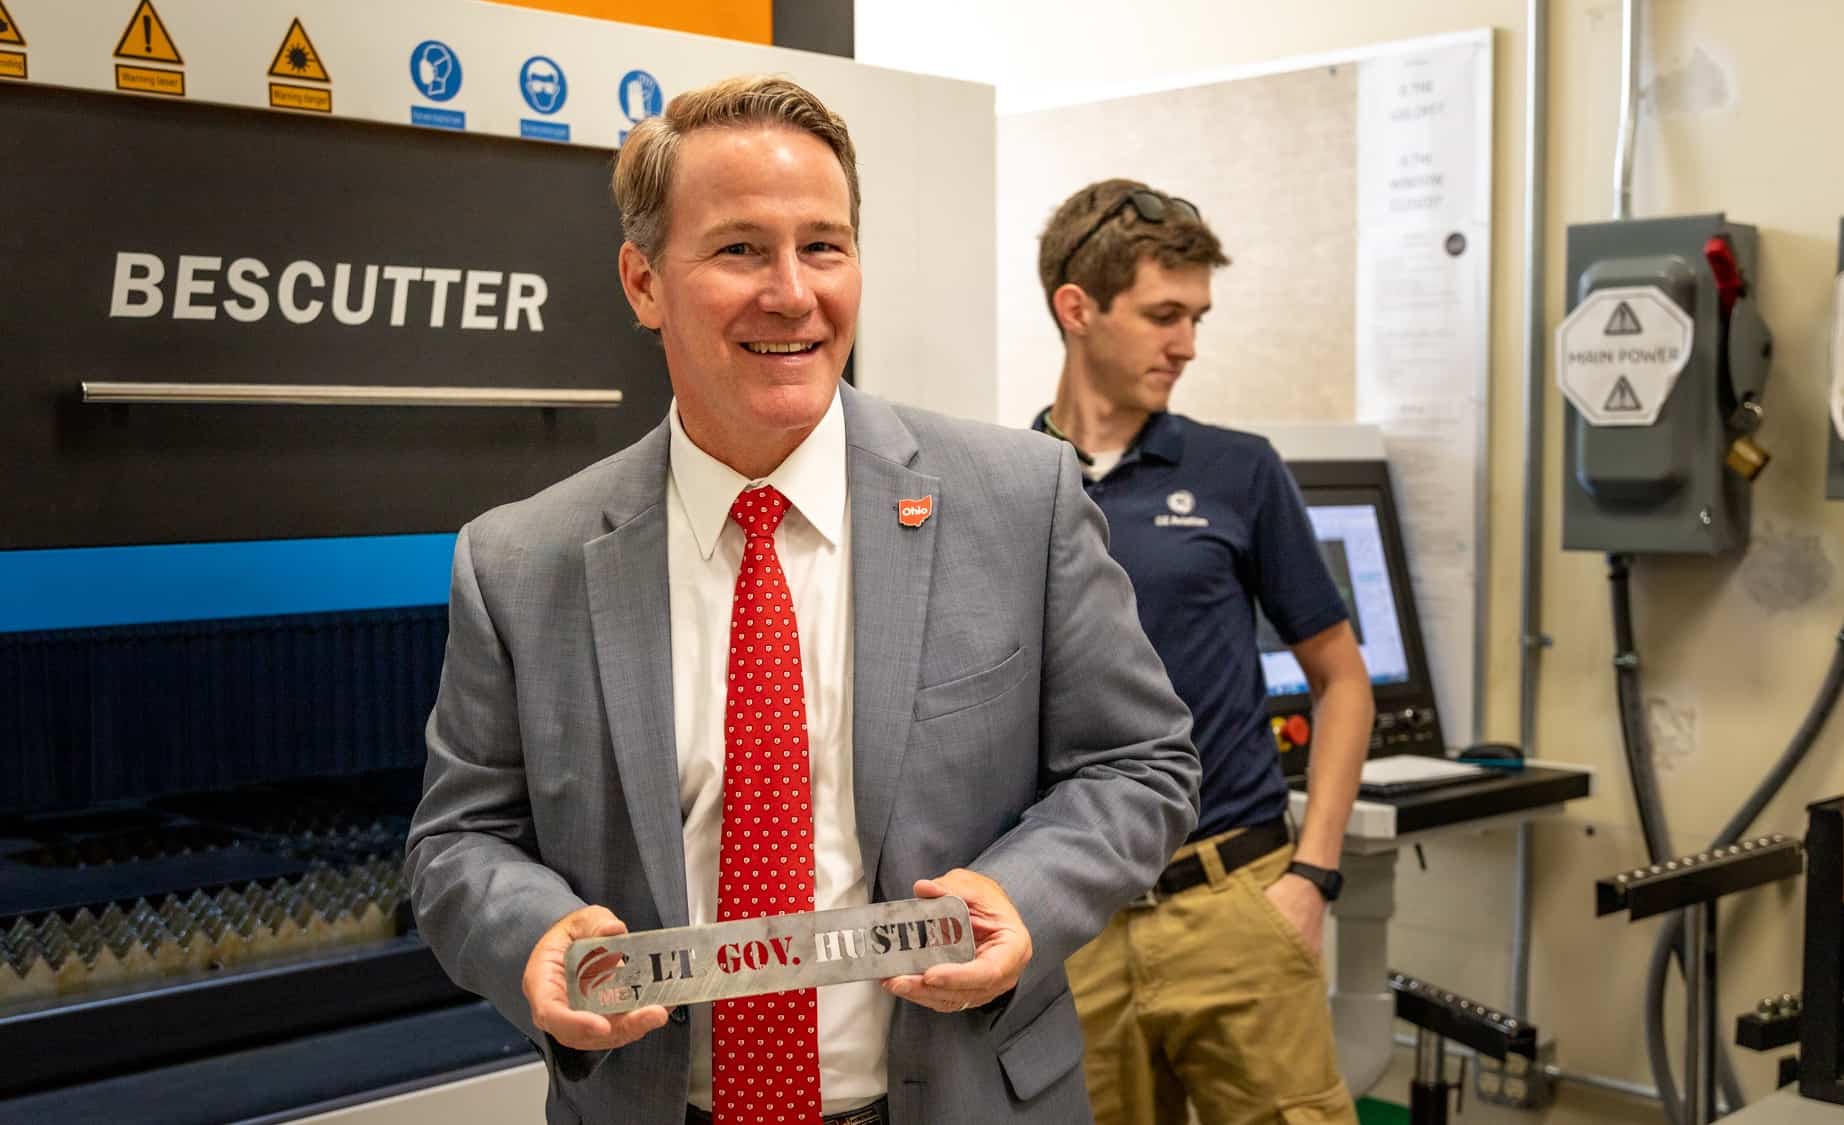 Mechanical Engineering Technology student Ed Alender used a fiber laser cutter to make a Name Plate for Lt. Gov. Husted